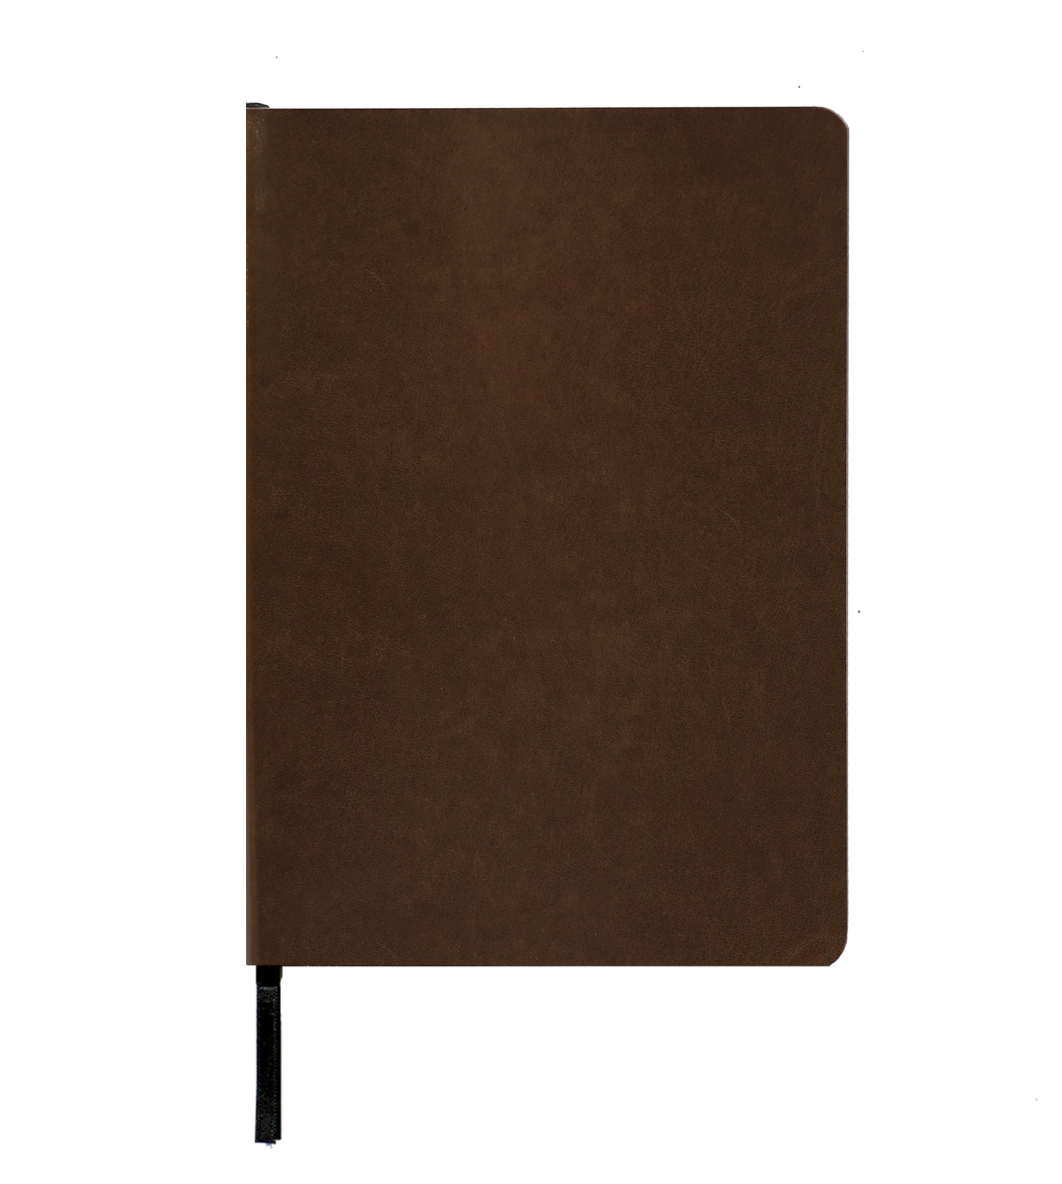 An Organised Life Brown Plain Vegan Leather A5 Notebook